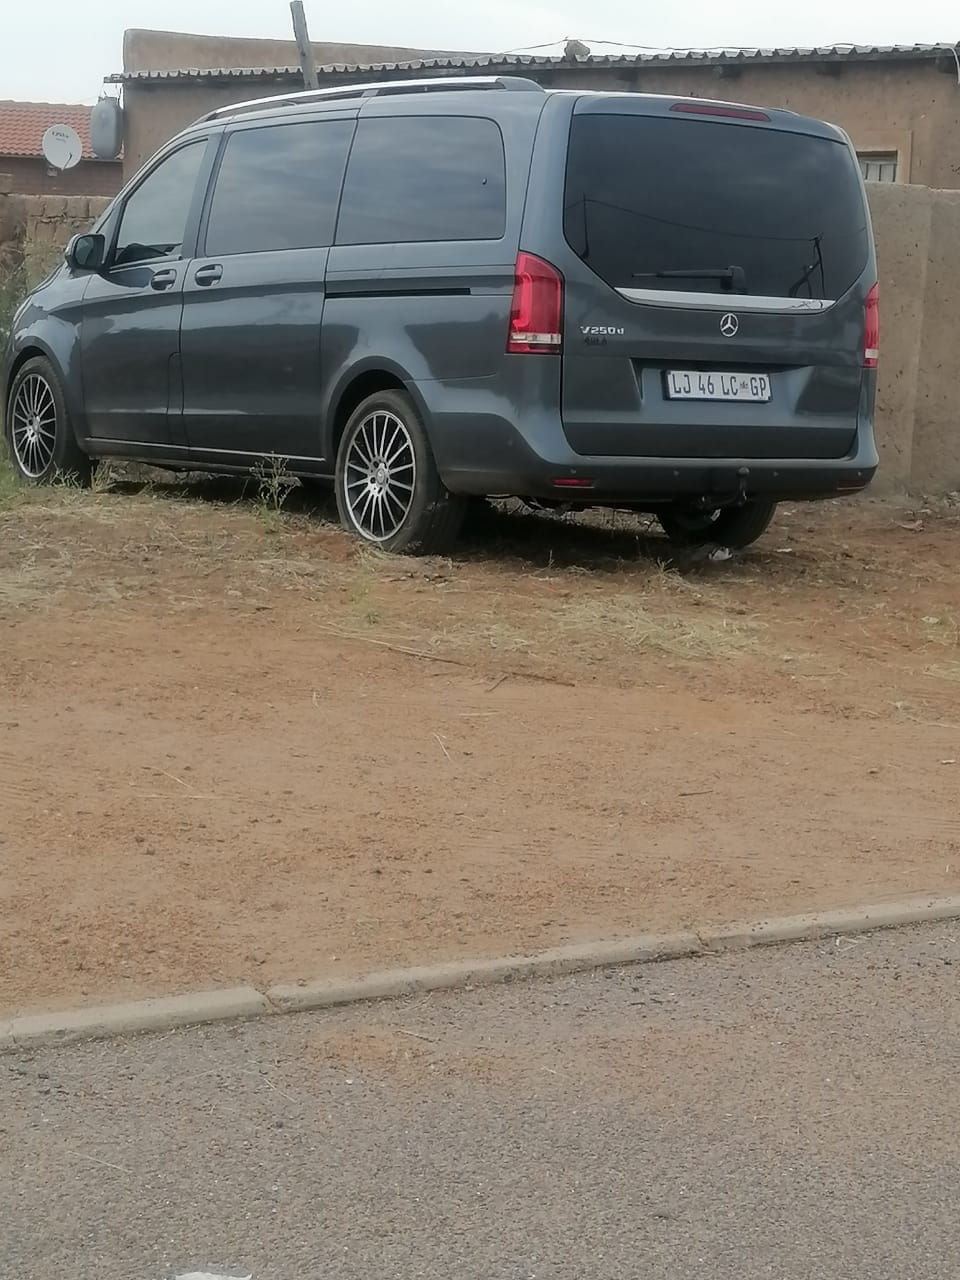 Hijacked vehicle recovered by Tshwane Metro Police Department